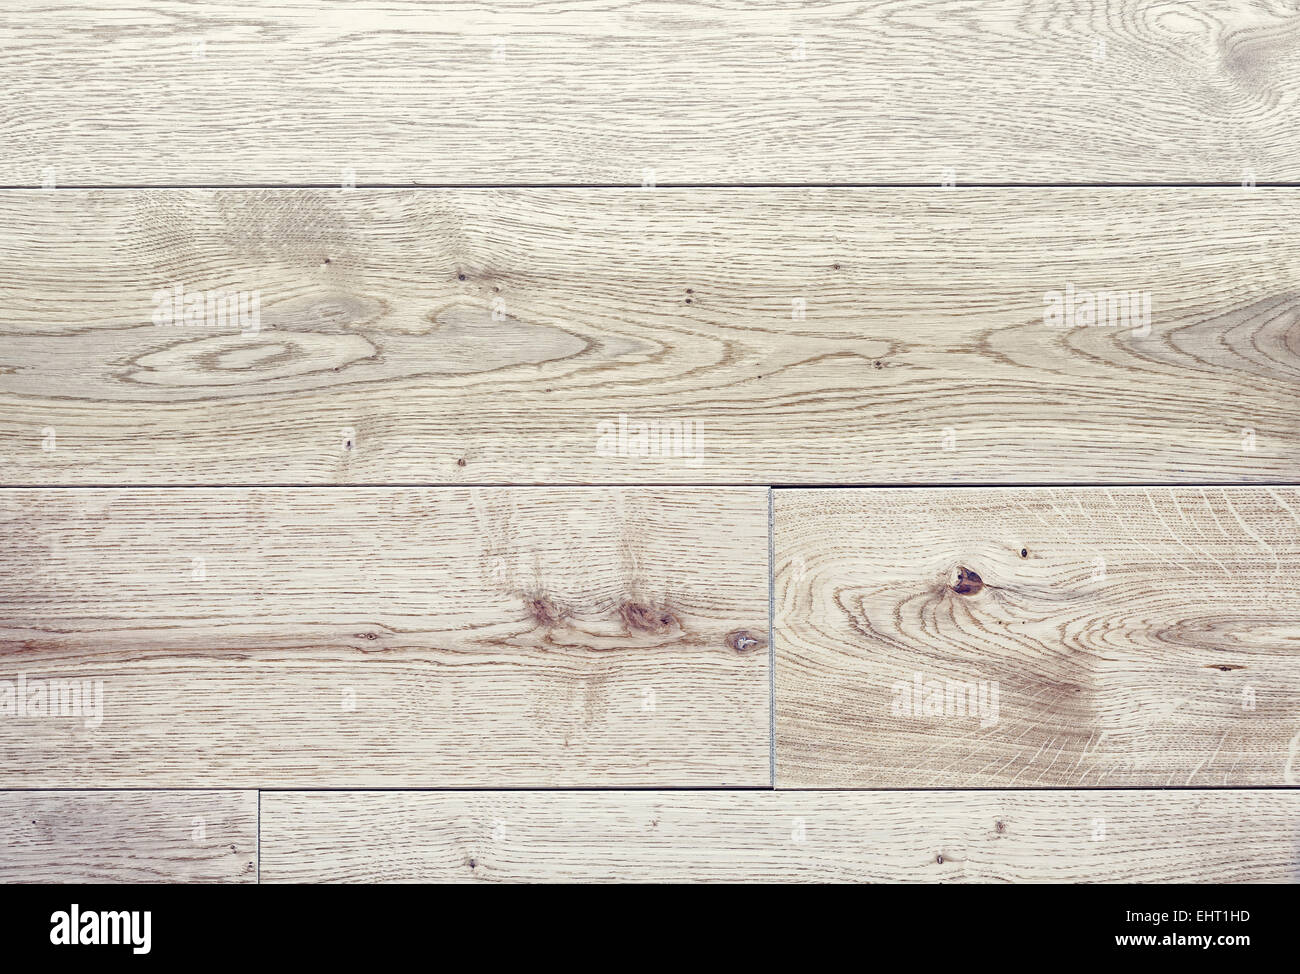 Detailed wooden nature background or texture. Stock Photo